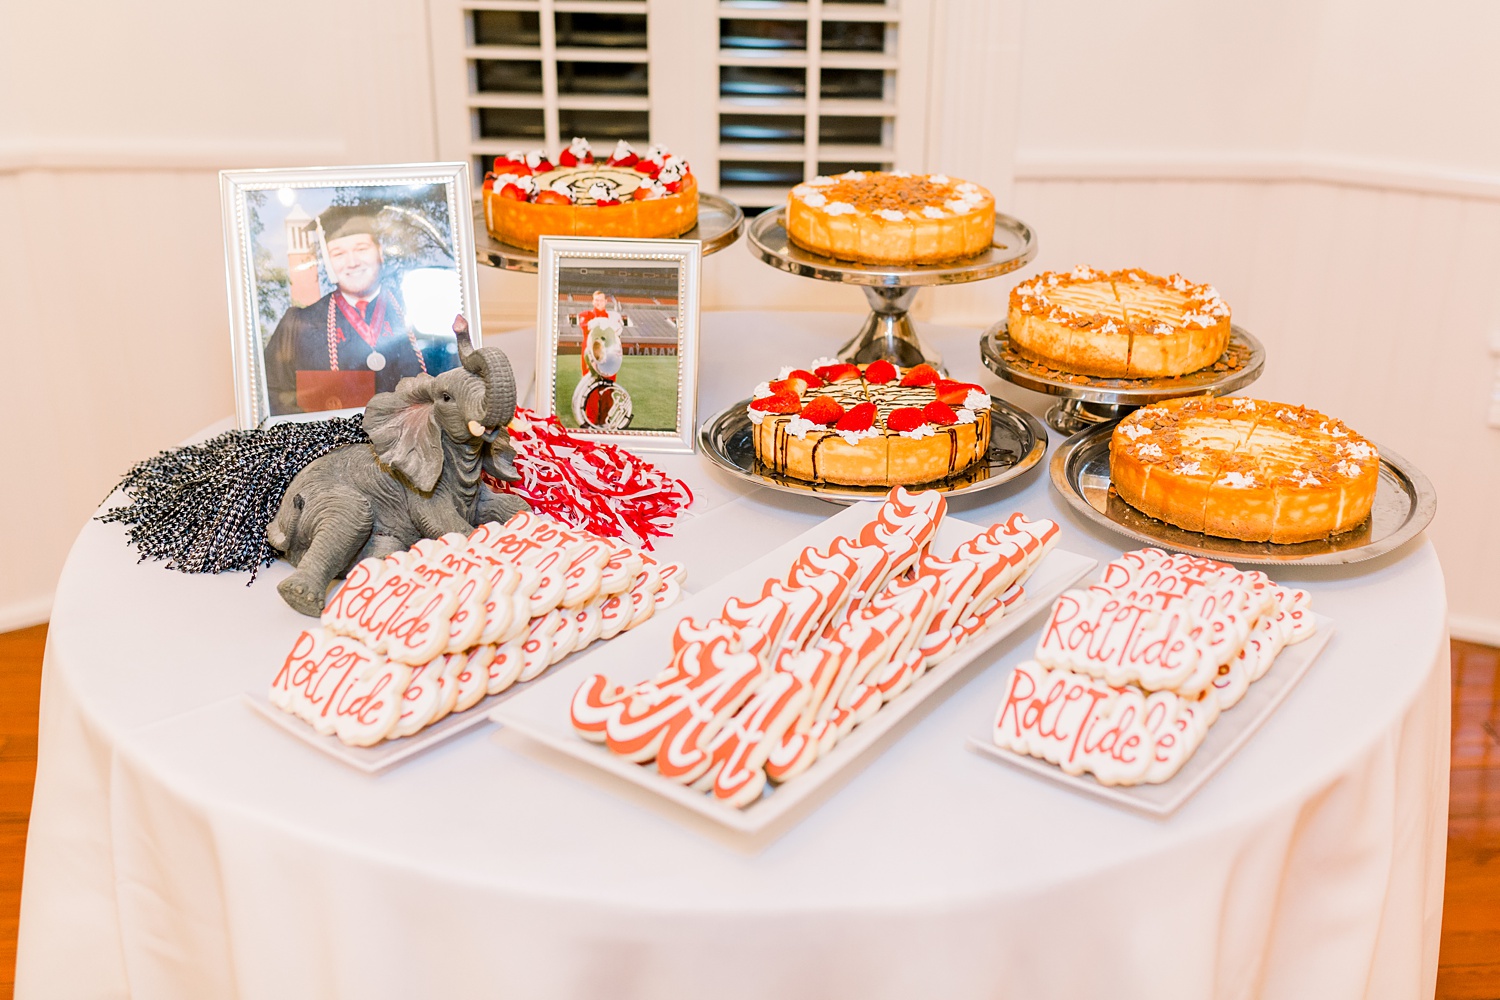 groom's table with Alabama themed desserts